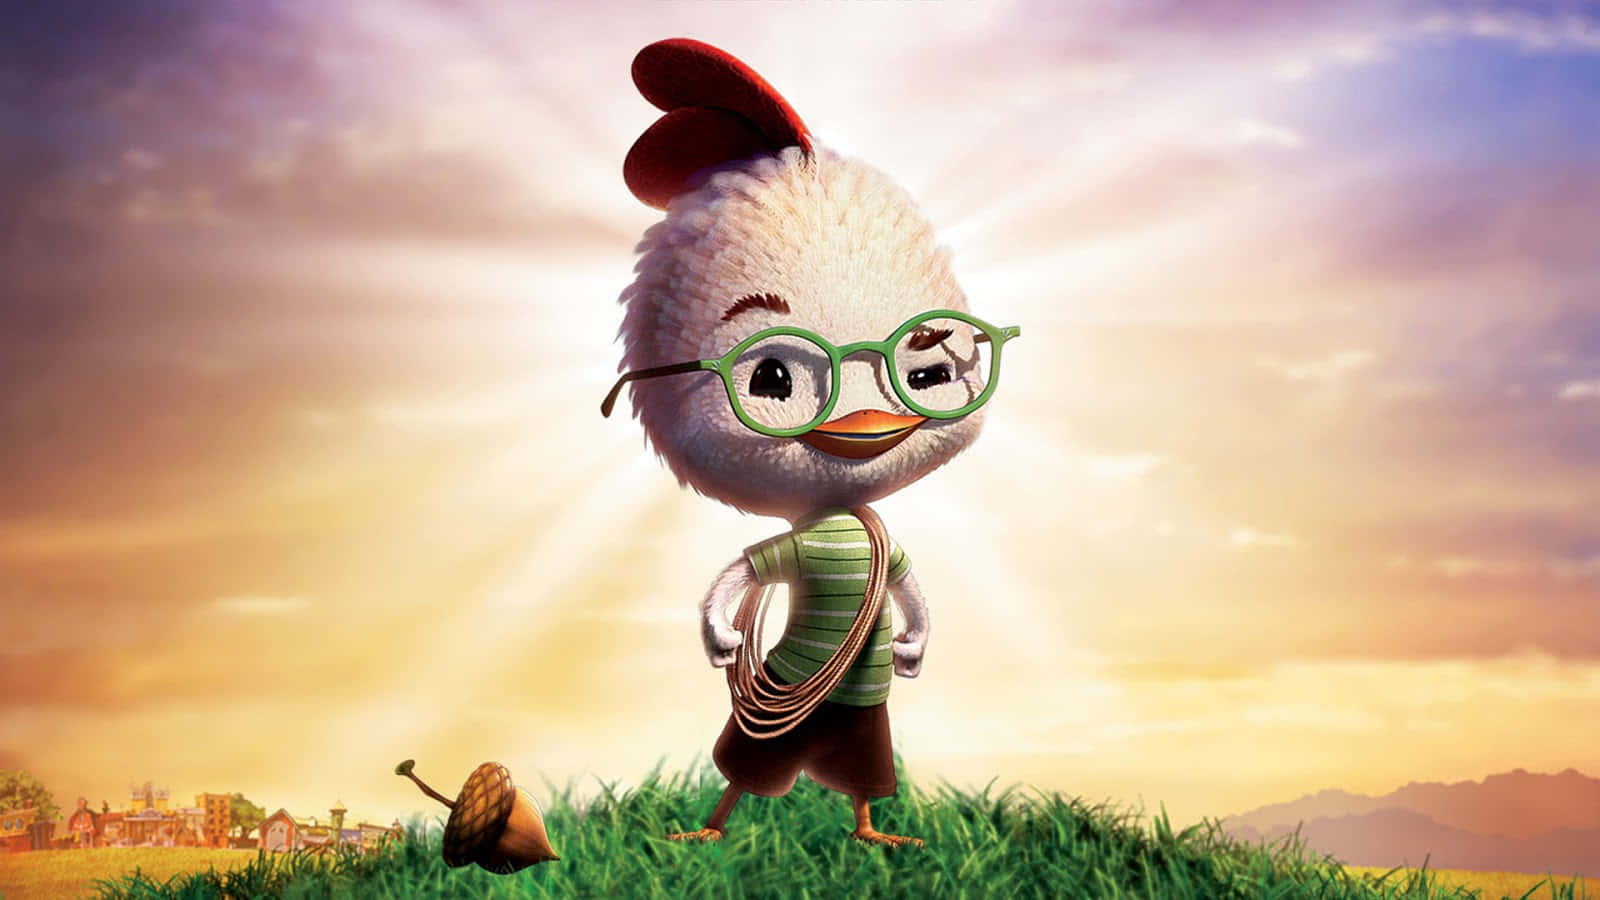 Chicken Little is a fairy tale made famous by Disney